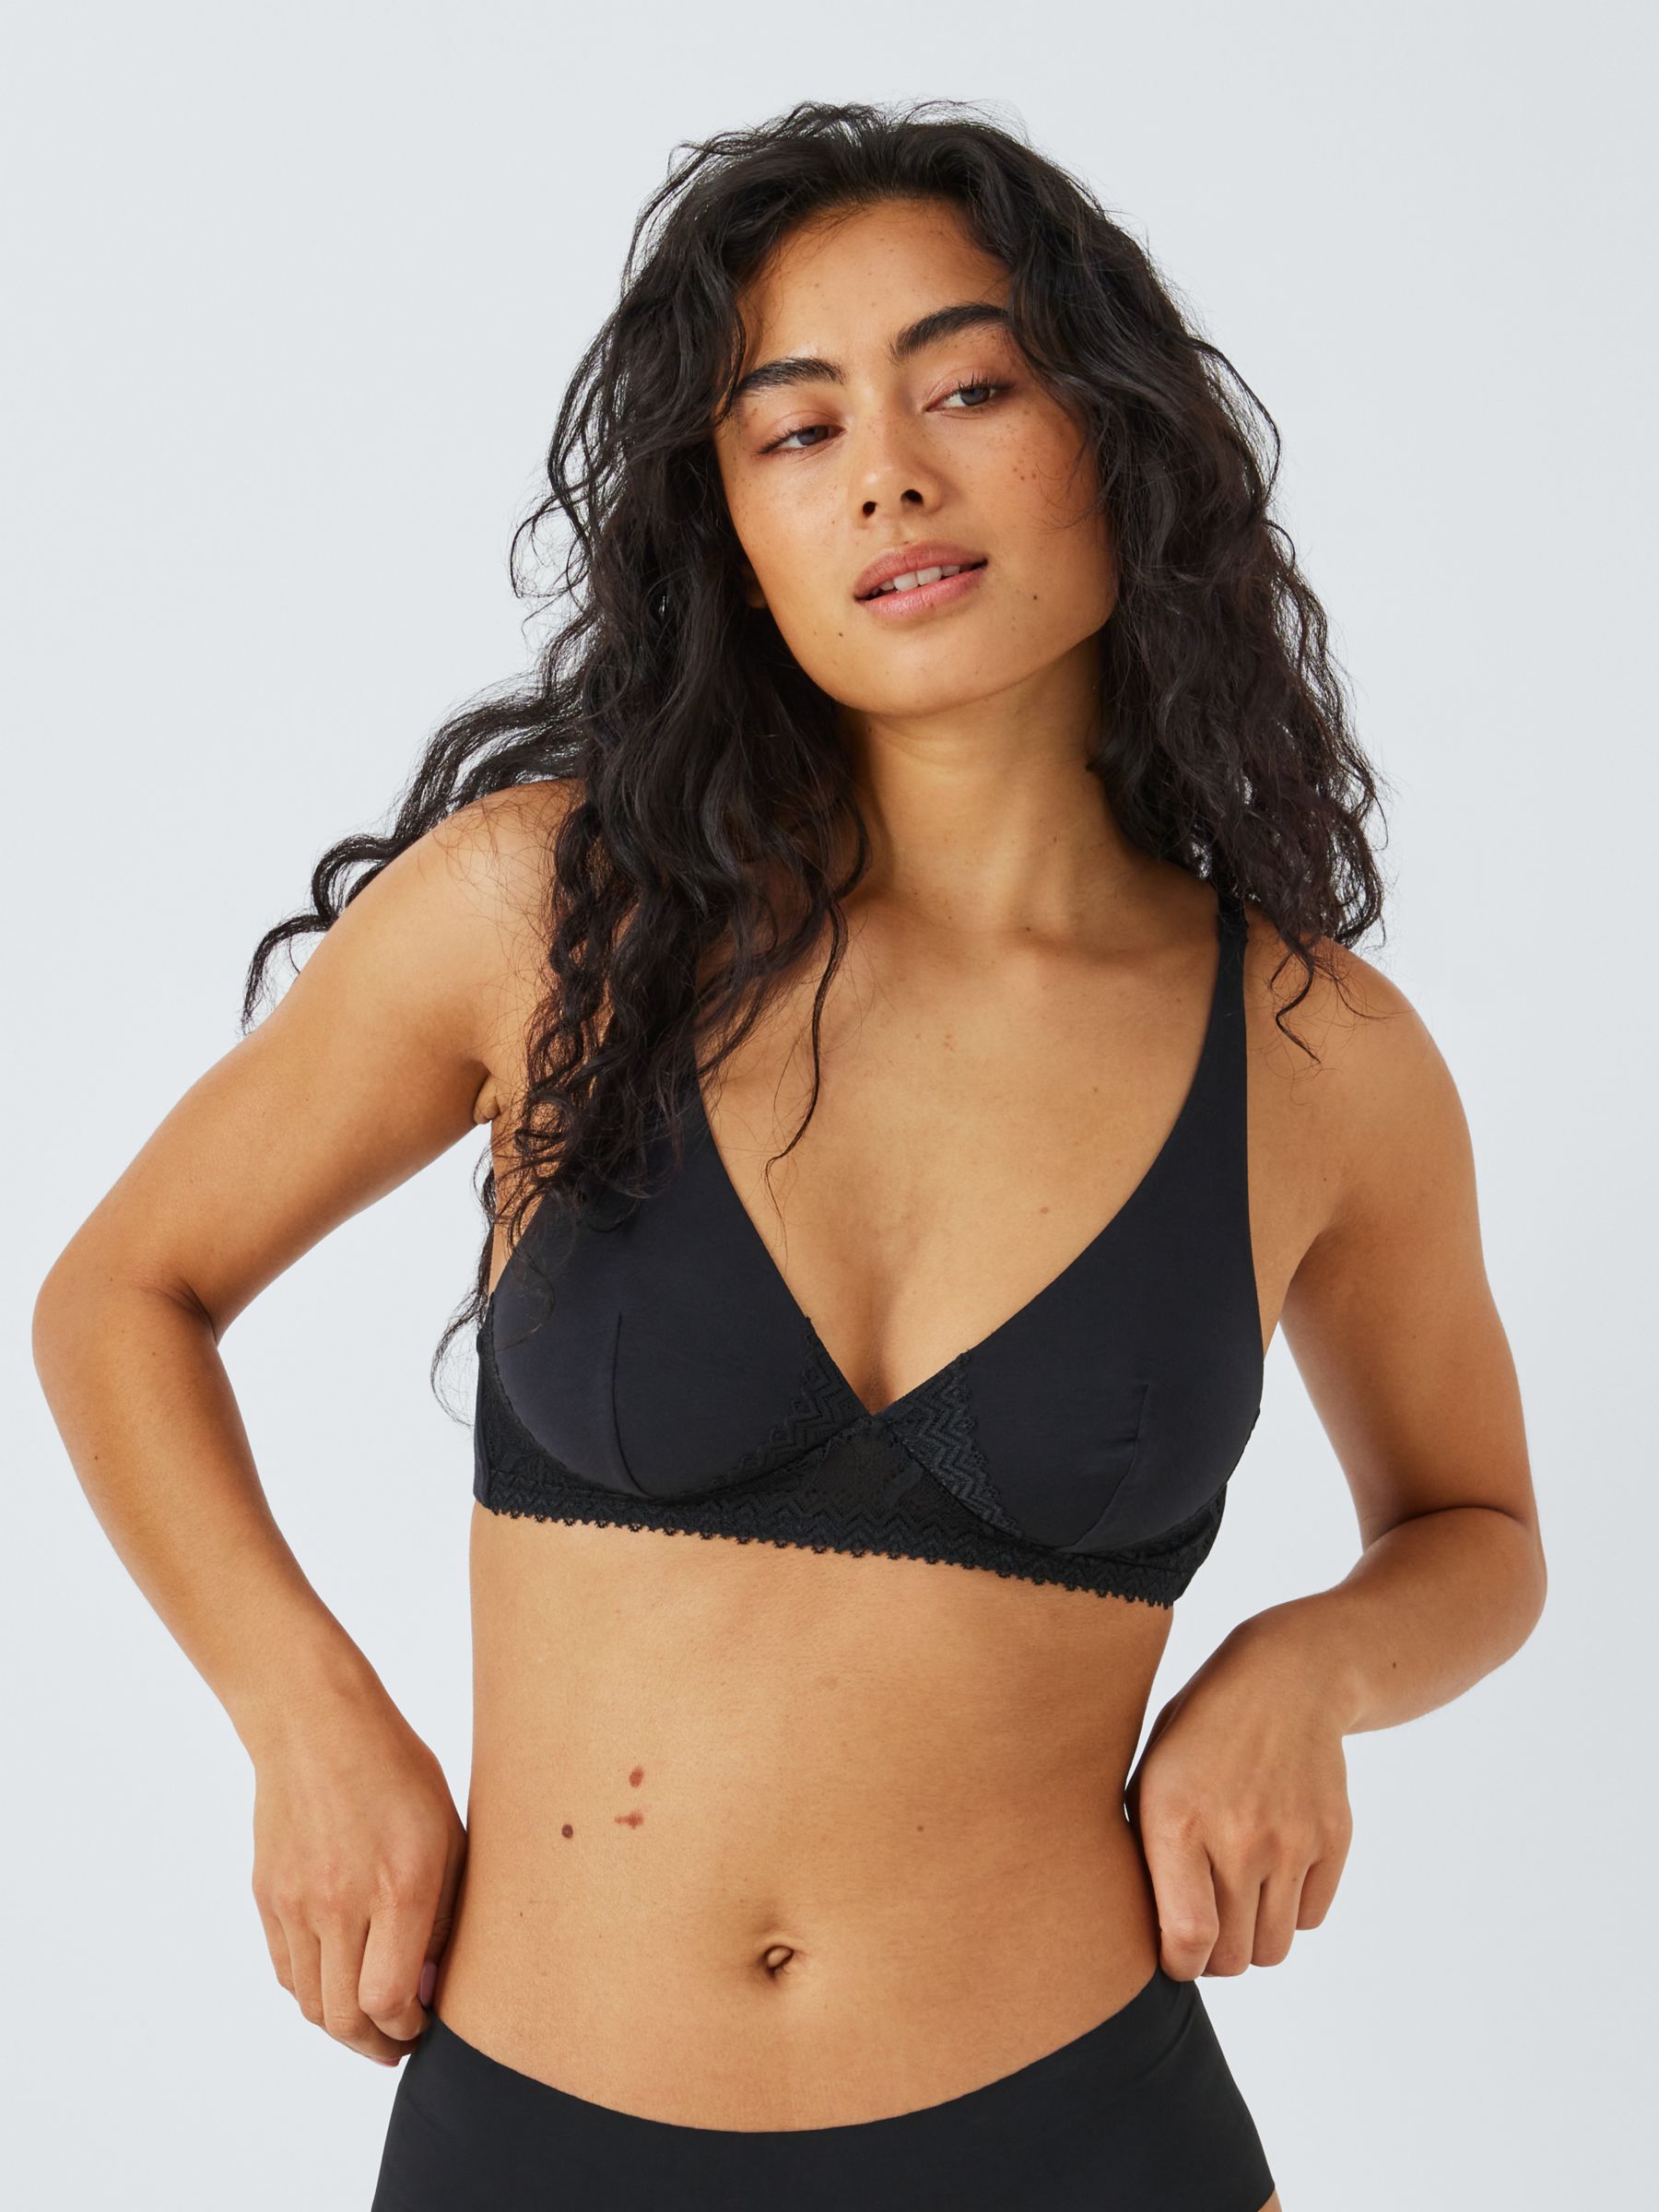 JOHN LEWIS ANYDAY Avery Non-Wired Lace Bra